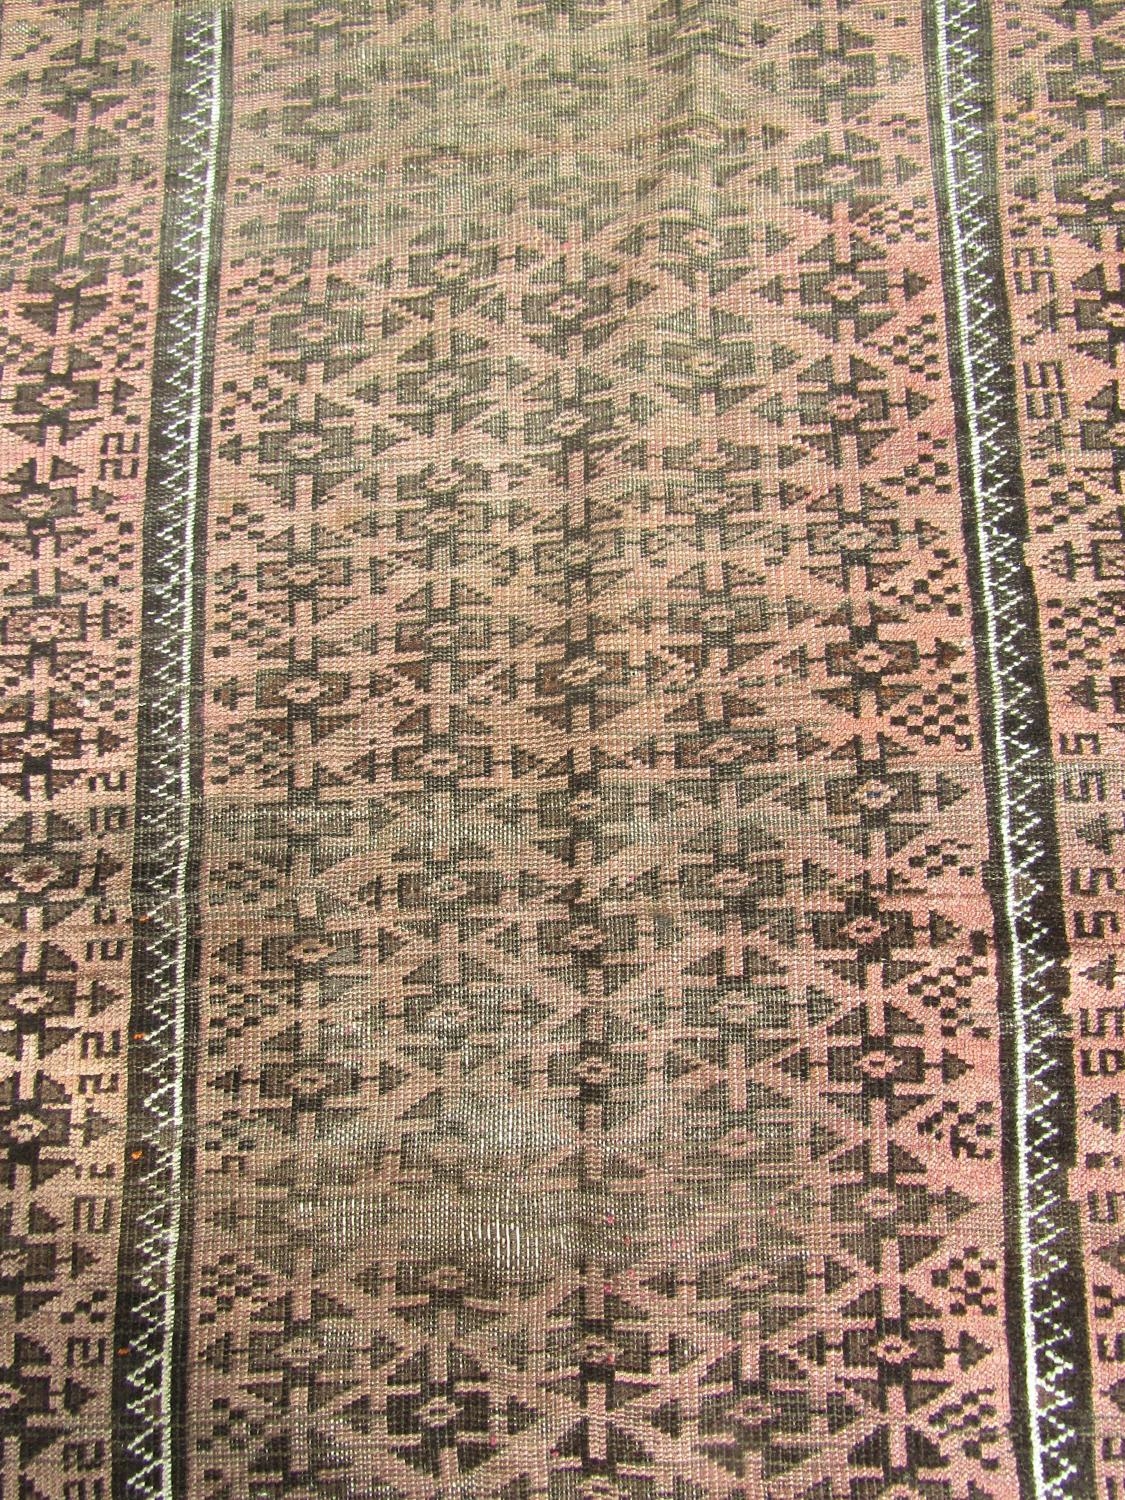 A worn Middle Eastern rug with repeated geometric design throughout in pale maroon and brown - Image 2 of 3